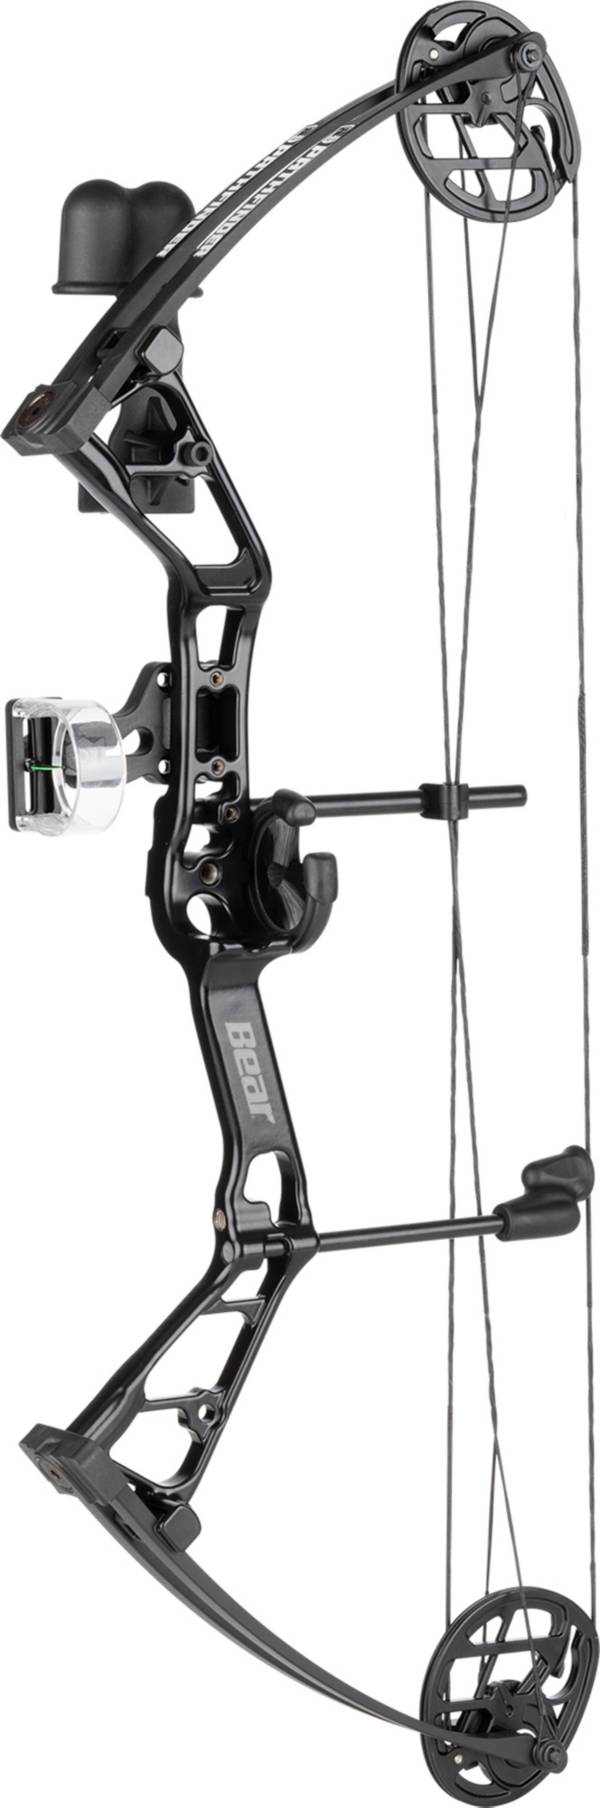 Bear Archery Youth Pathfinder RTH Compound Bow Package product image